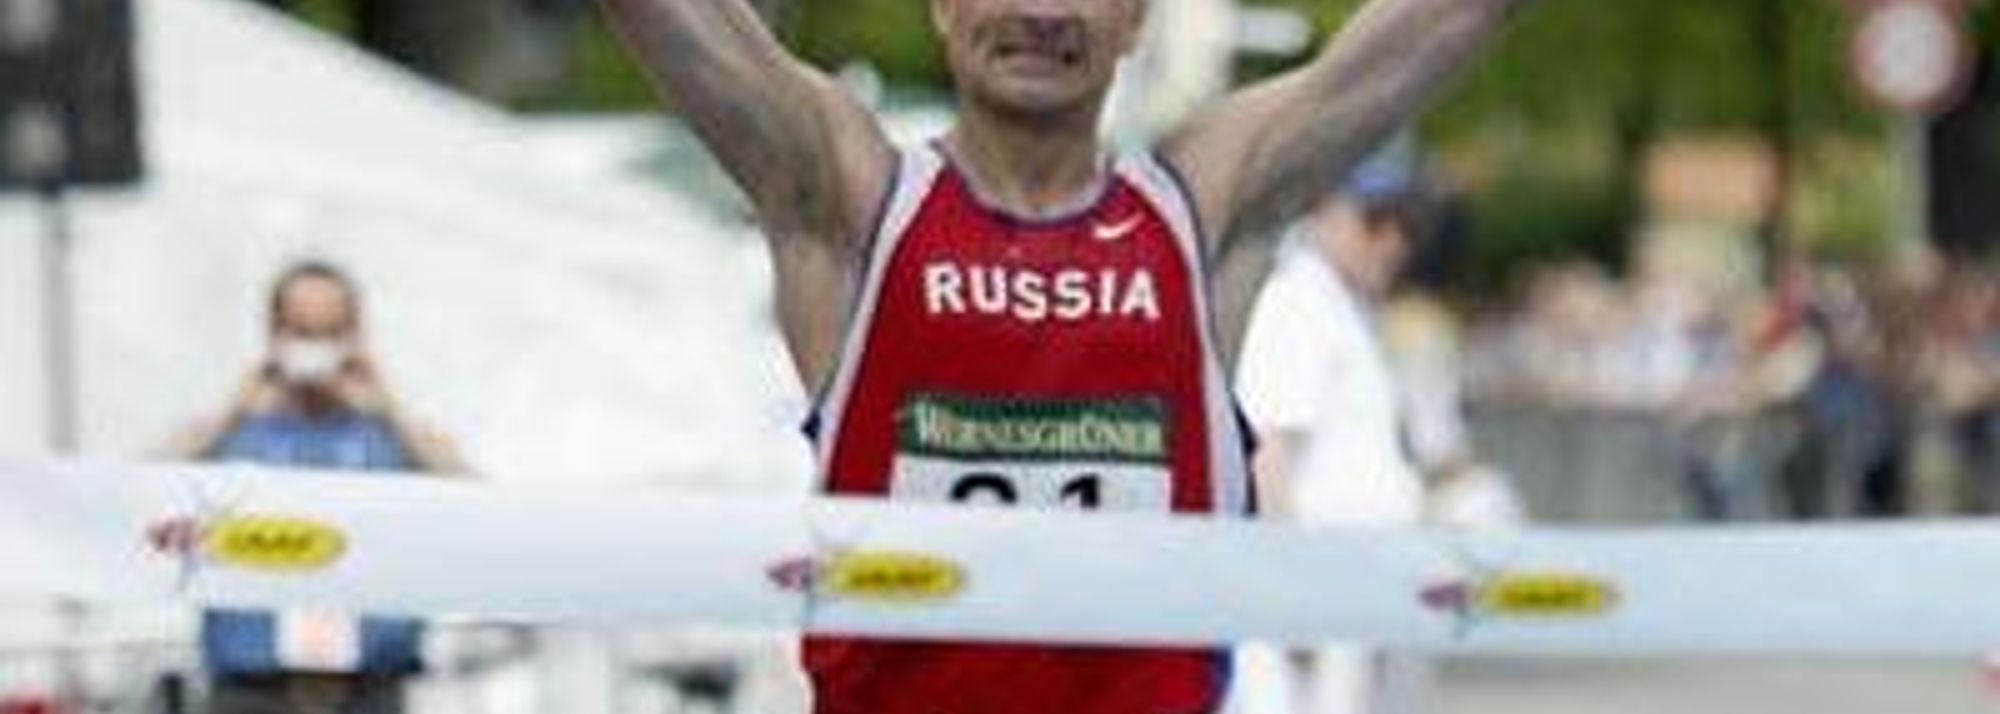 After a merciless battle in the sun Aleksey Voyovedin became the third walker to retain his 50km World Walking title.